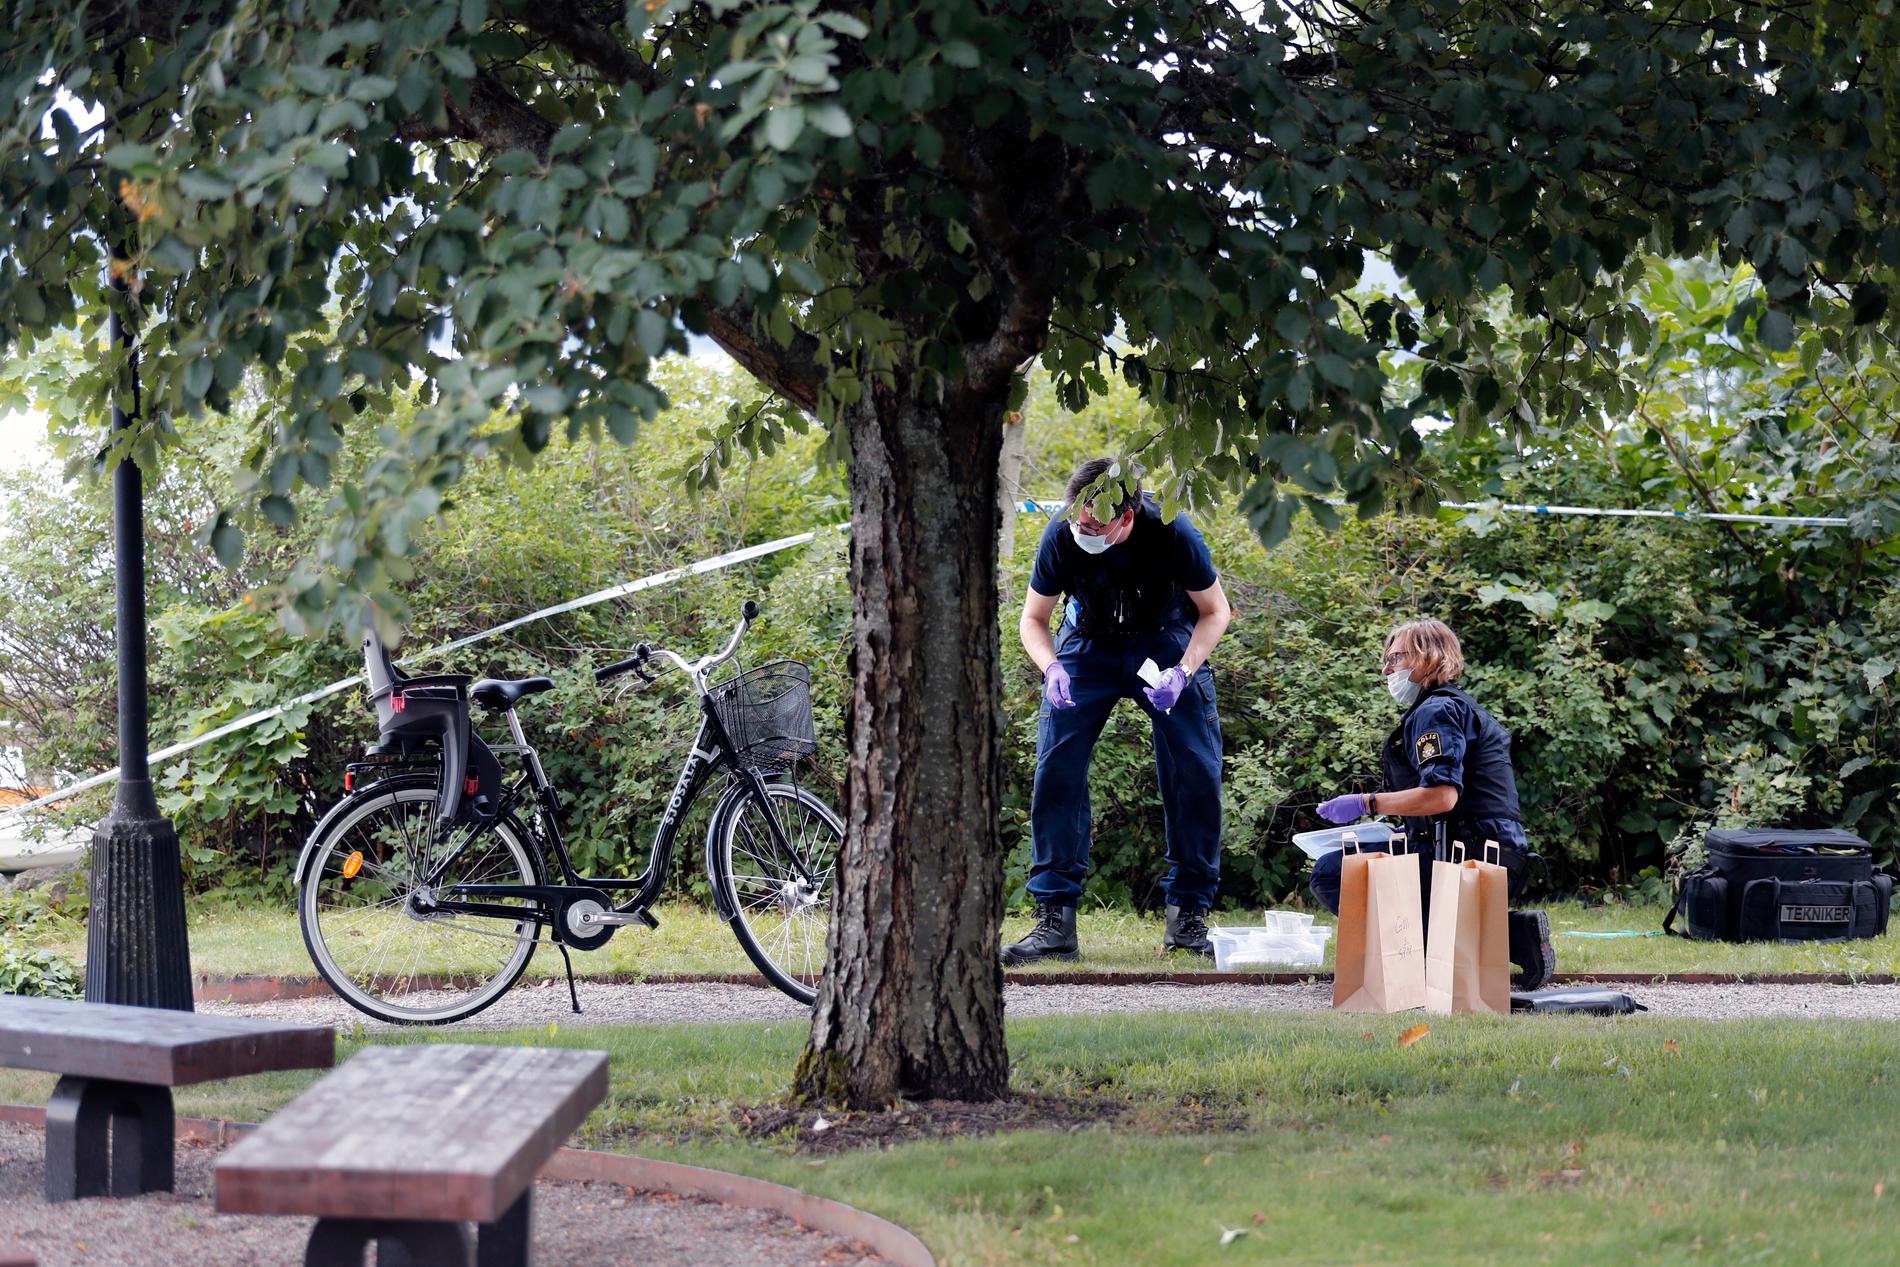 Police crime scene investigators work in a park close to the cathedral.